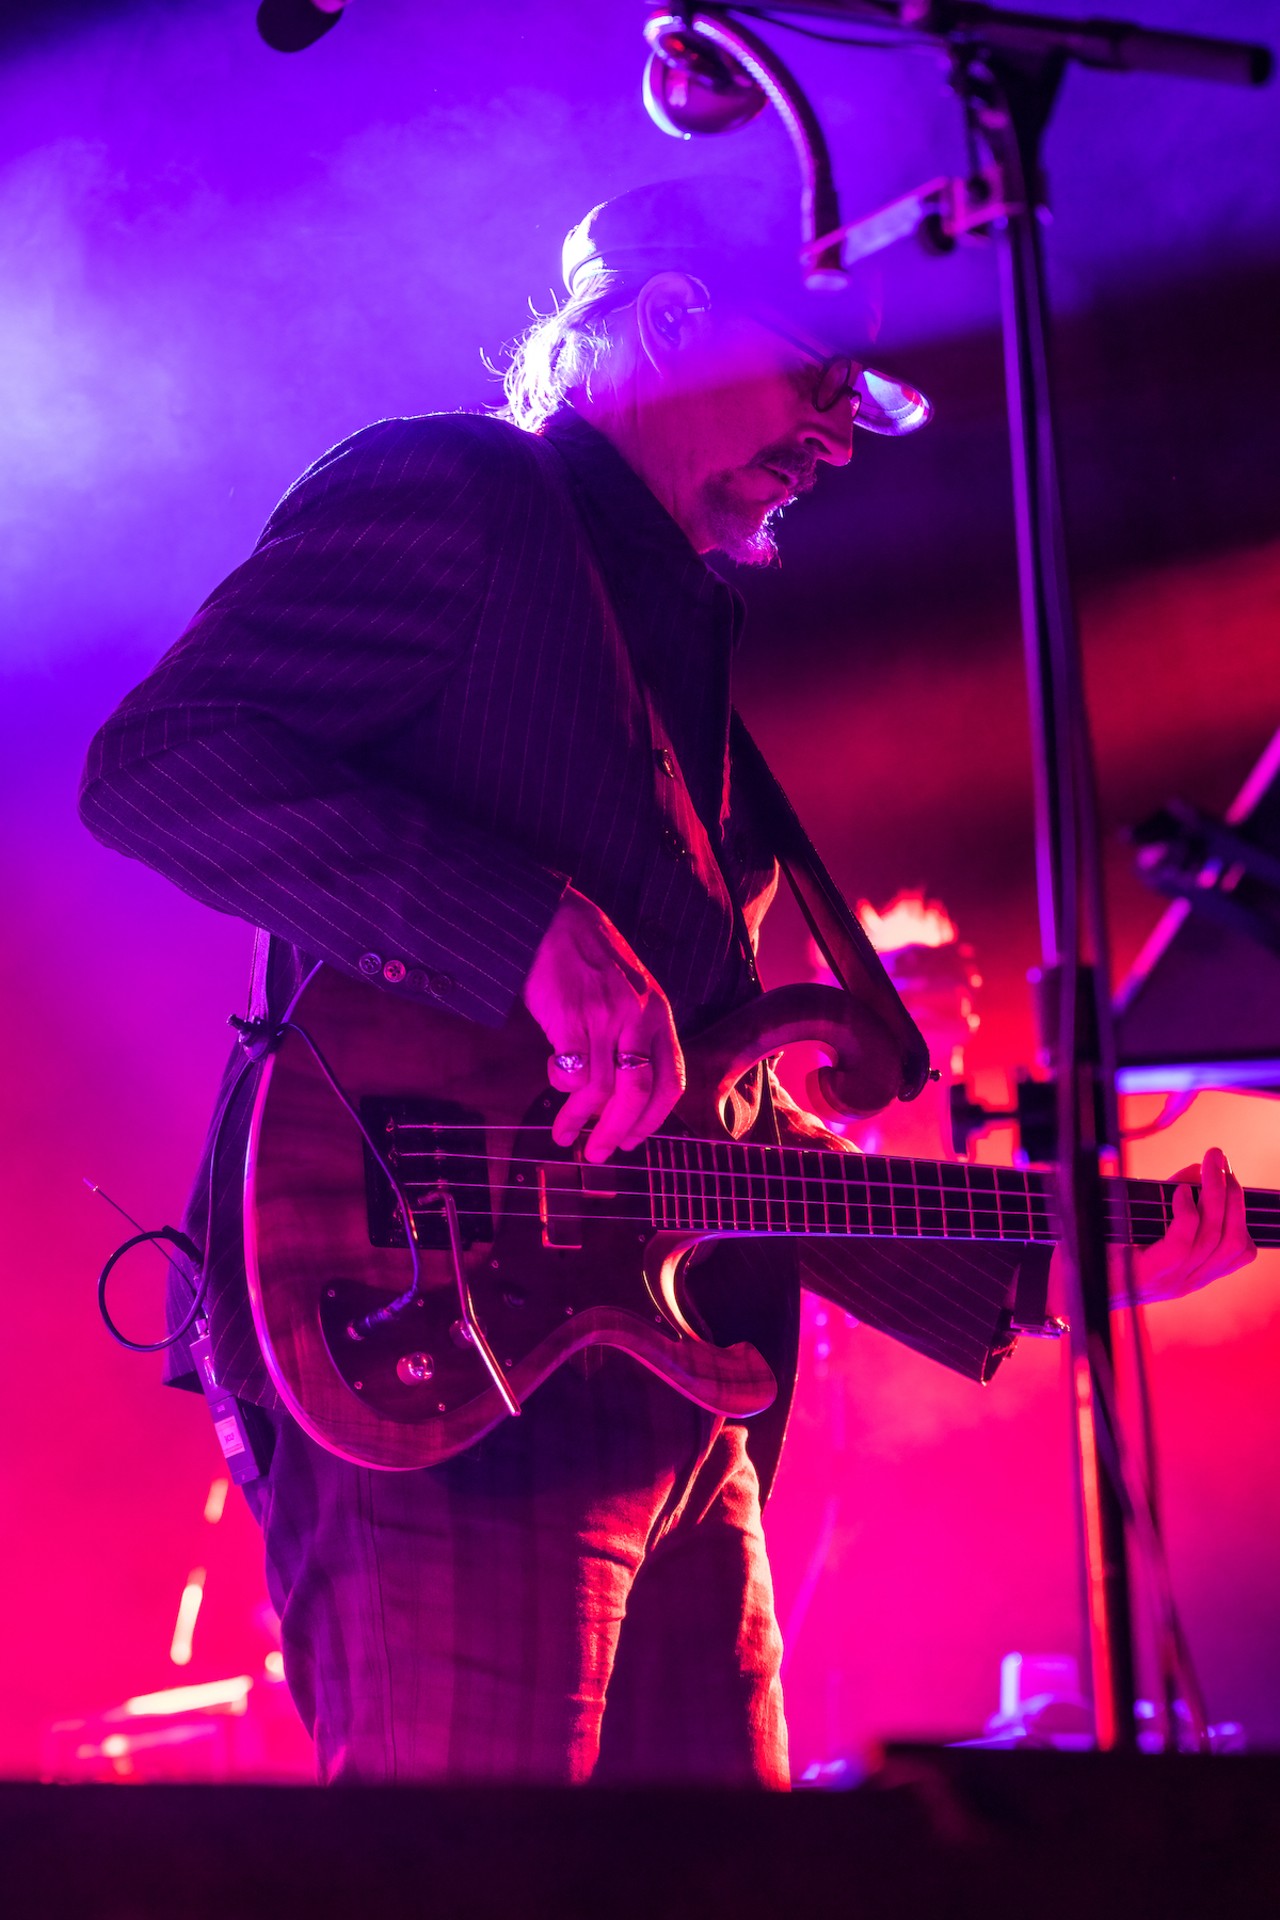 Photos: In Tampa, Les Claypool and Sean Lennon lead freaky, intoxicating Frog Brigade through Pink Floyd cuts and more